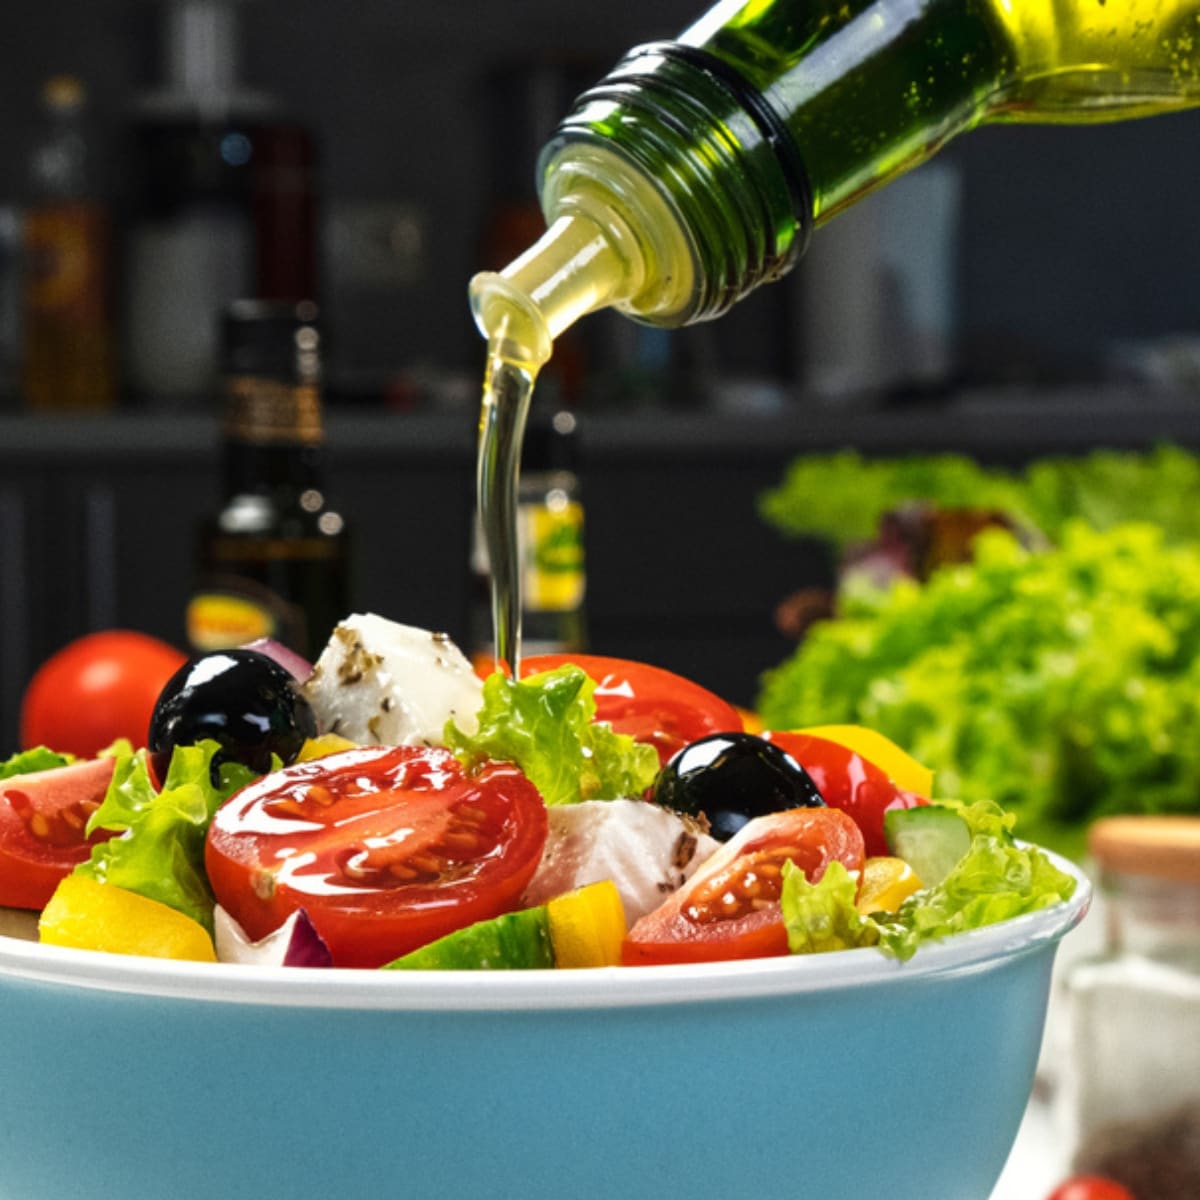 Pouring Olive Oil To a Bowl of Fresh Vegetable Salad
